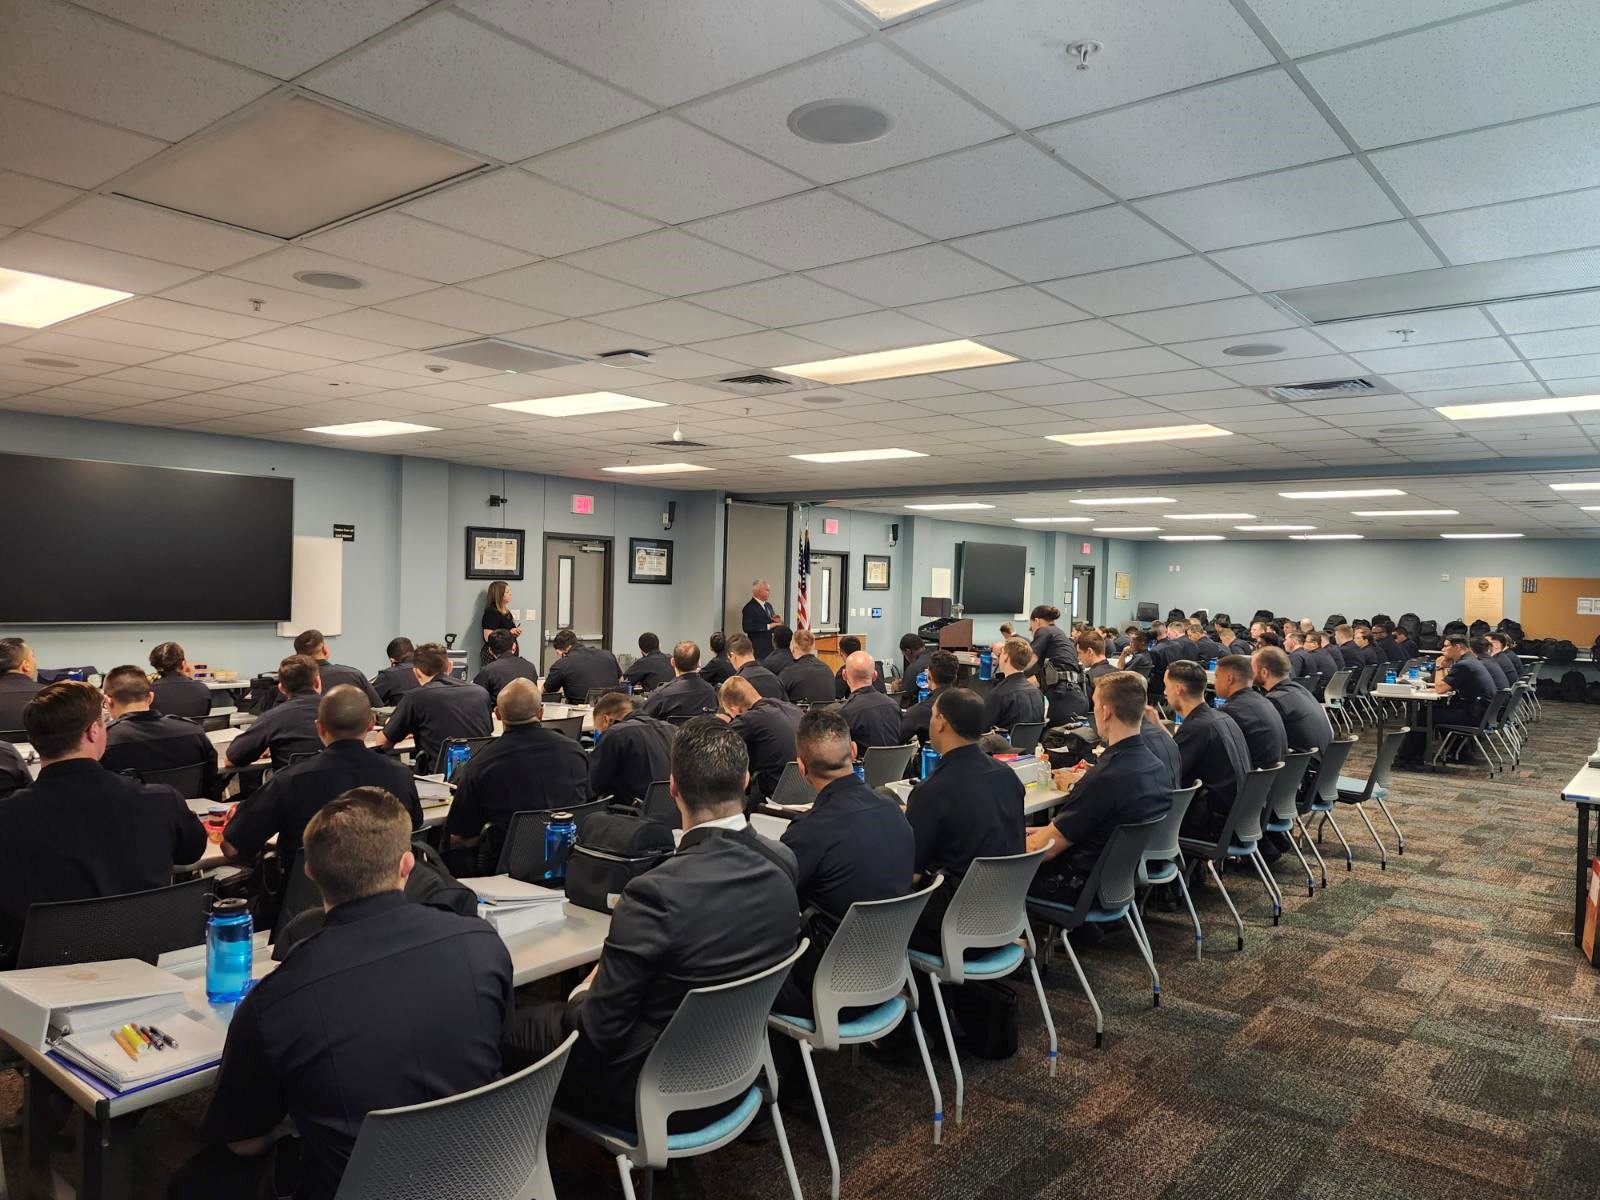 A multitude of police cadets sit at long tables listening to a presentation.